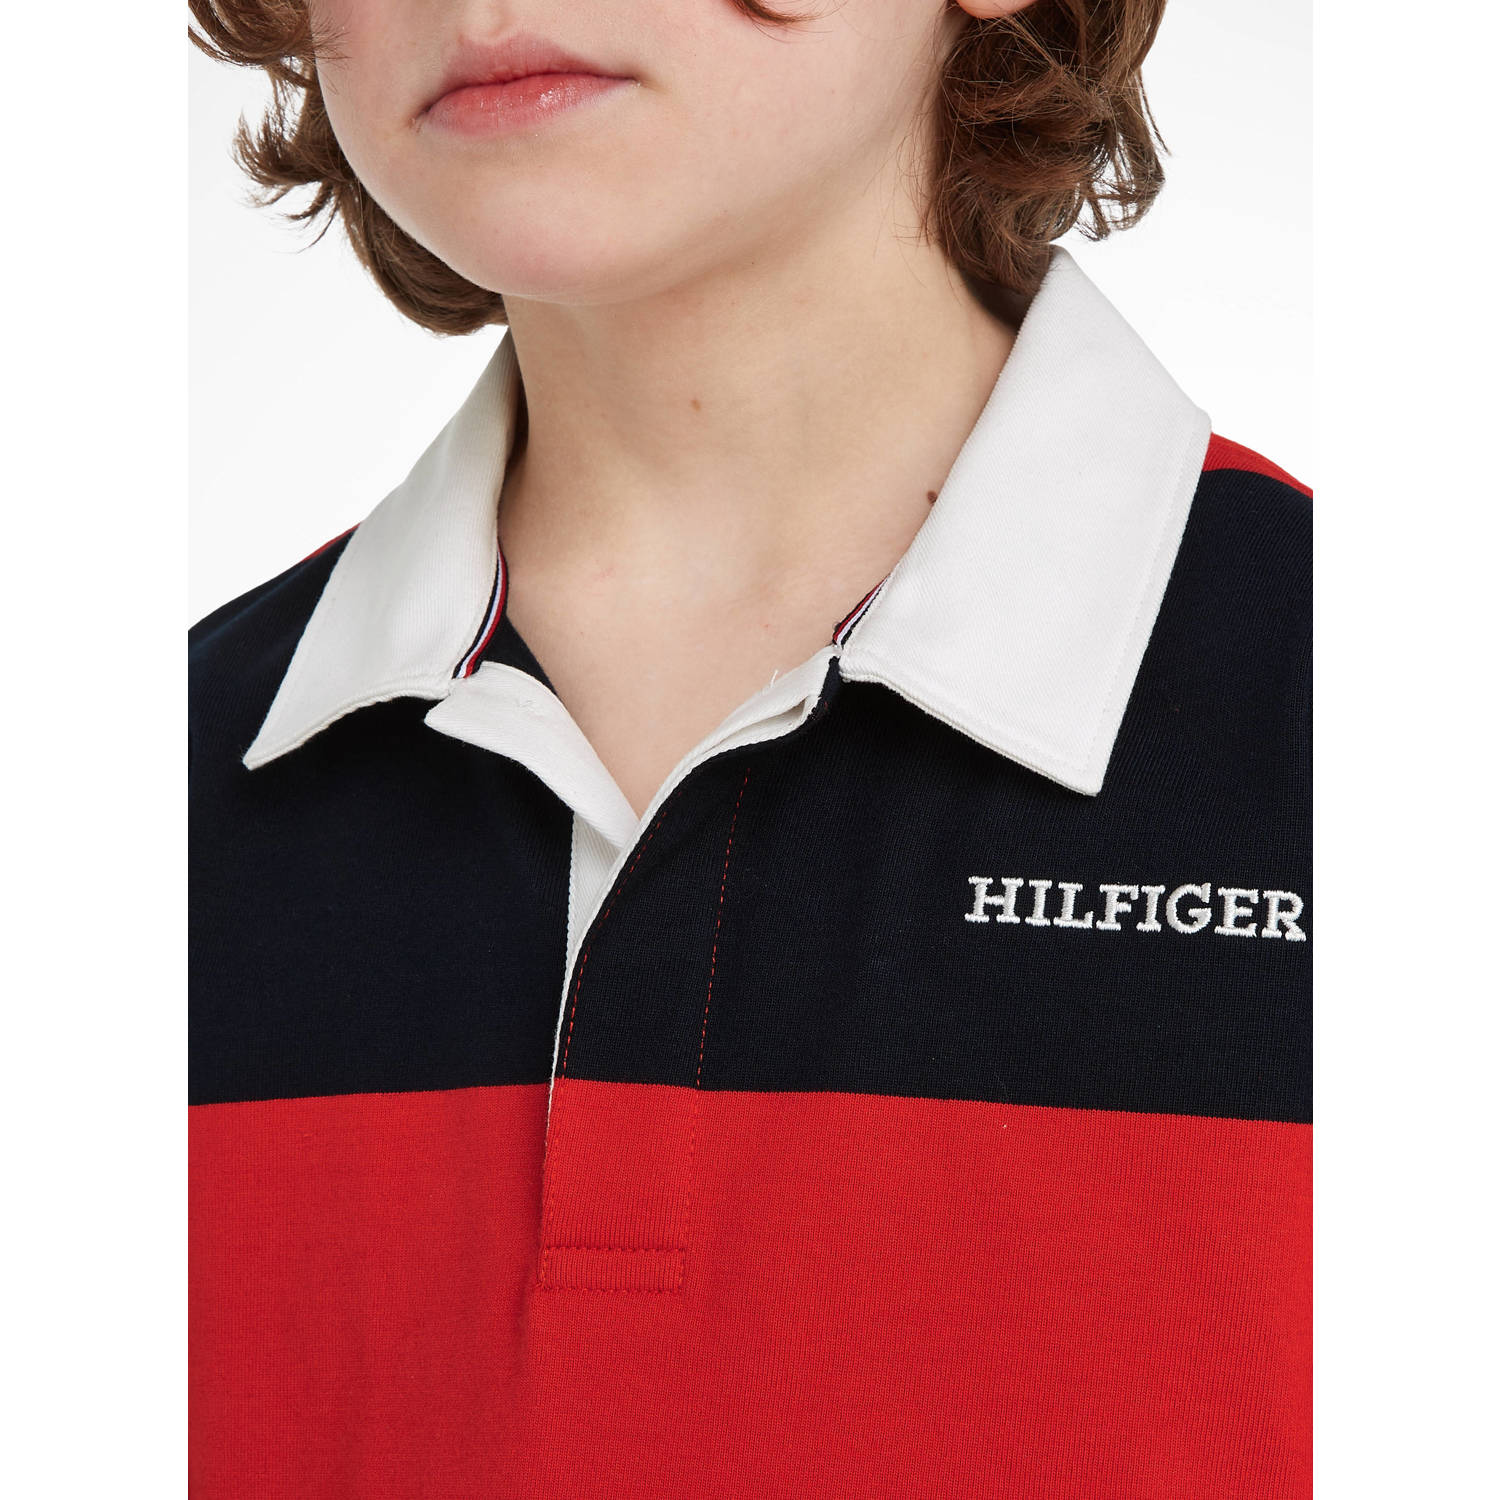 Tommy Hilfiger polo met logo rood blauw